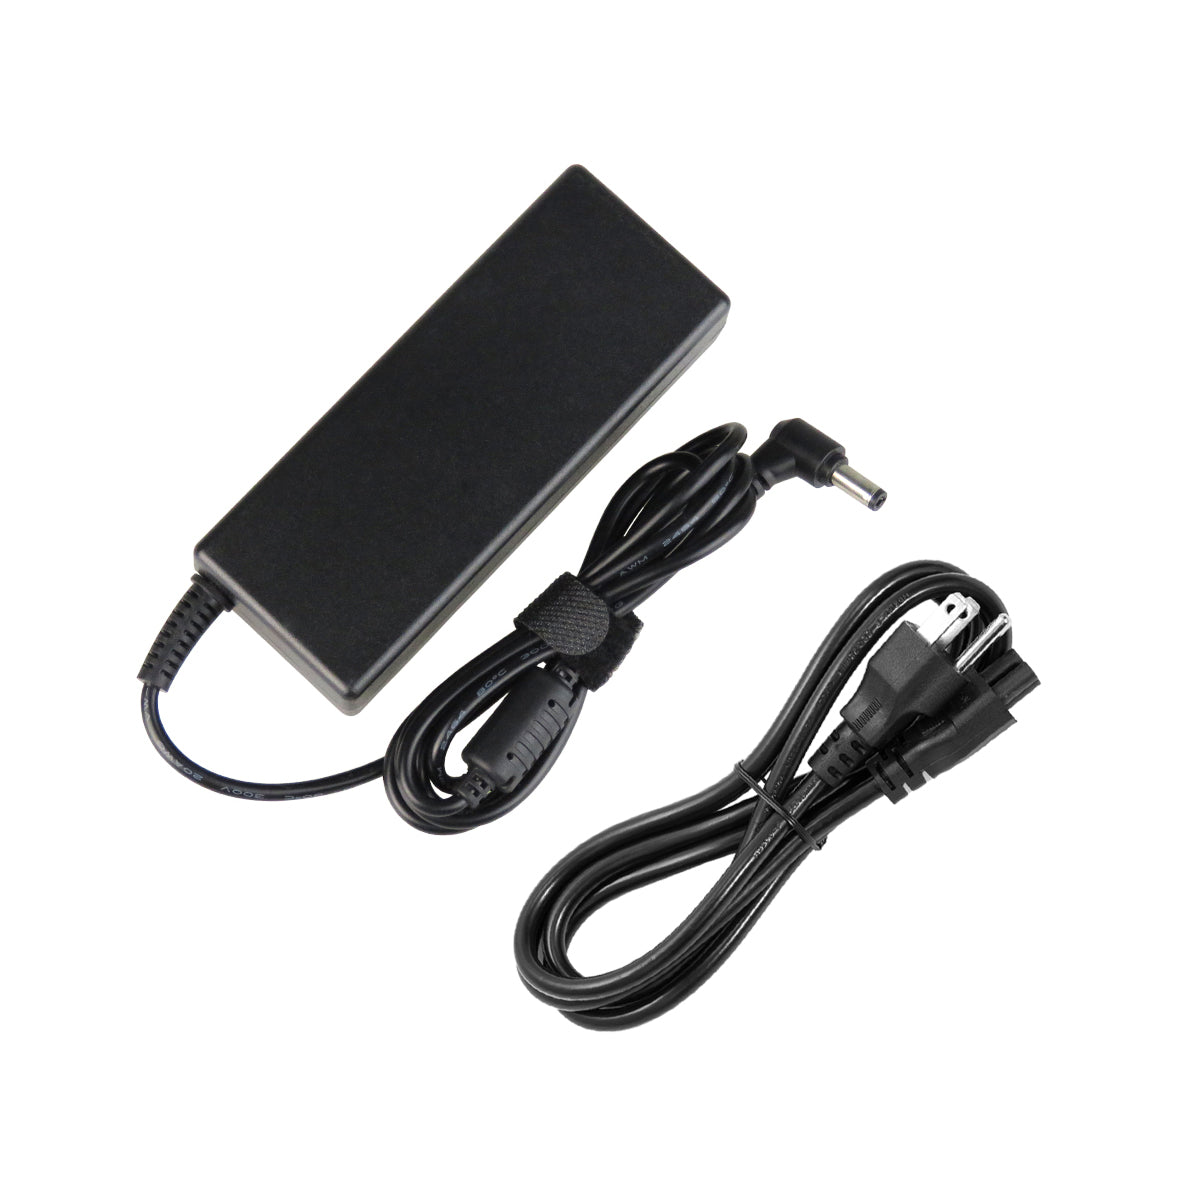 AC Adapter Charger for ASUS A8 Notebook.